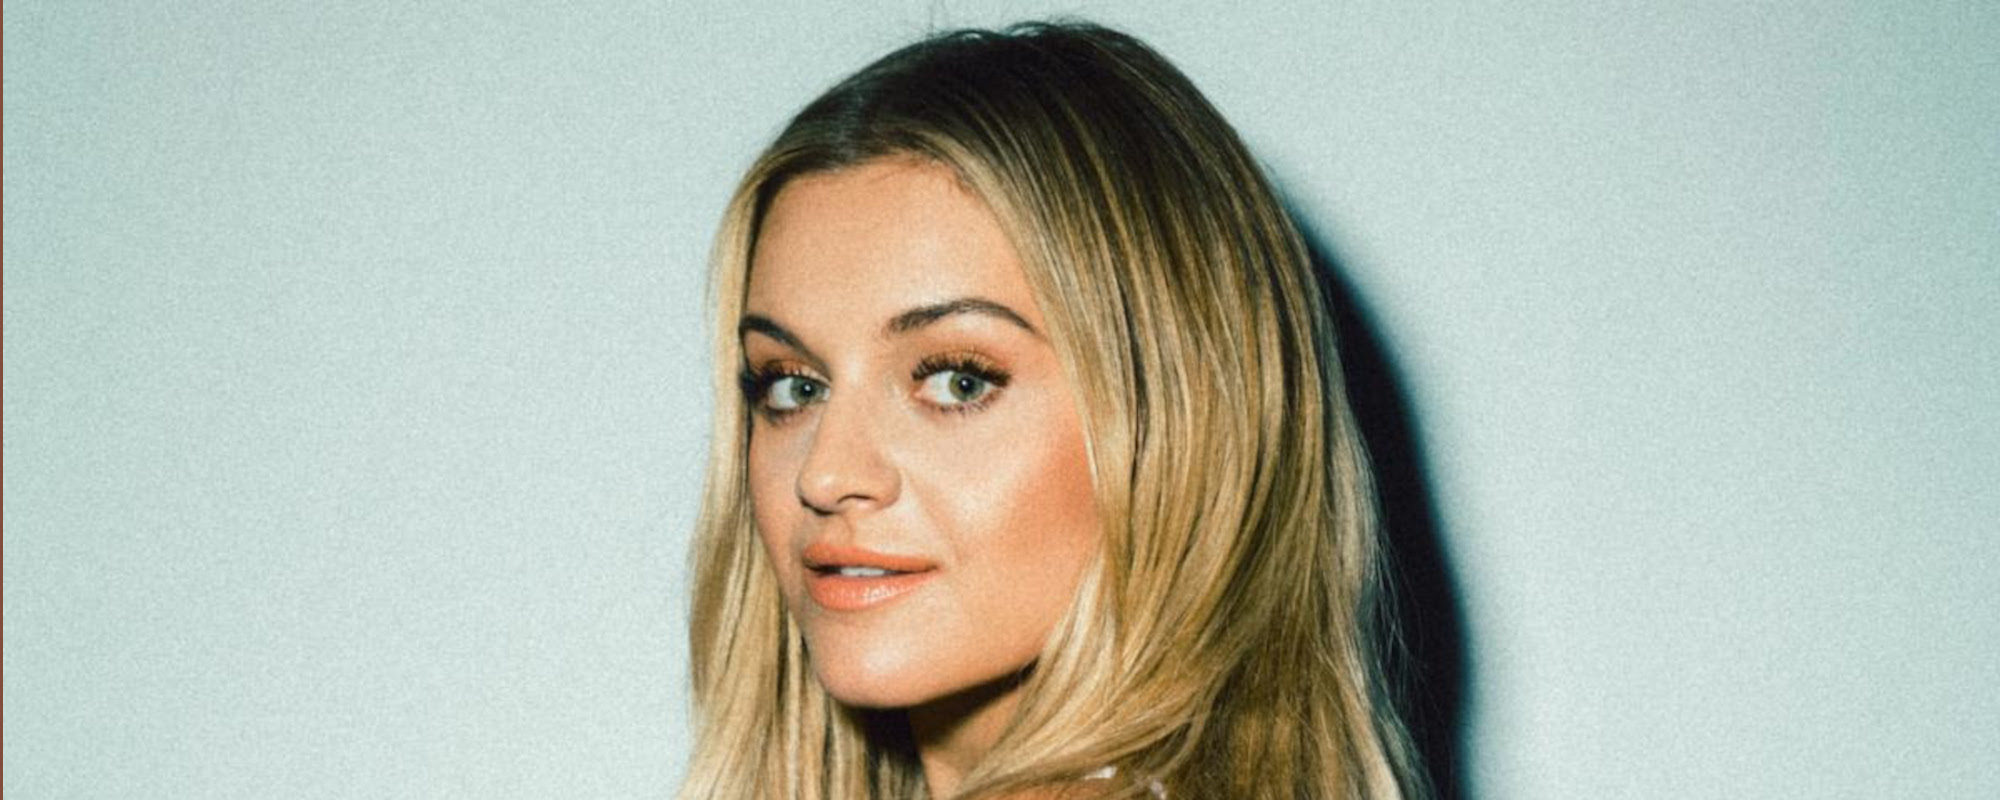 ‘Saturday Night Live’ Announces Kelsea Ballerini and The 1975 as March Musical Guests